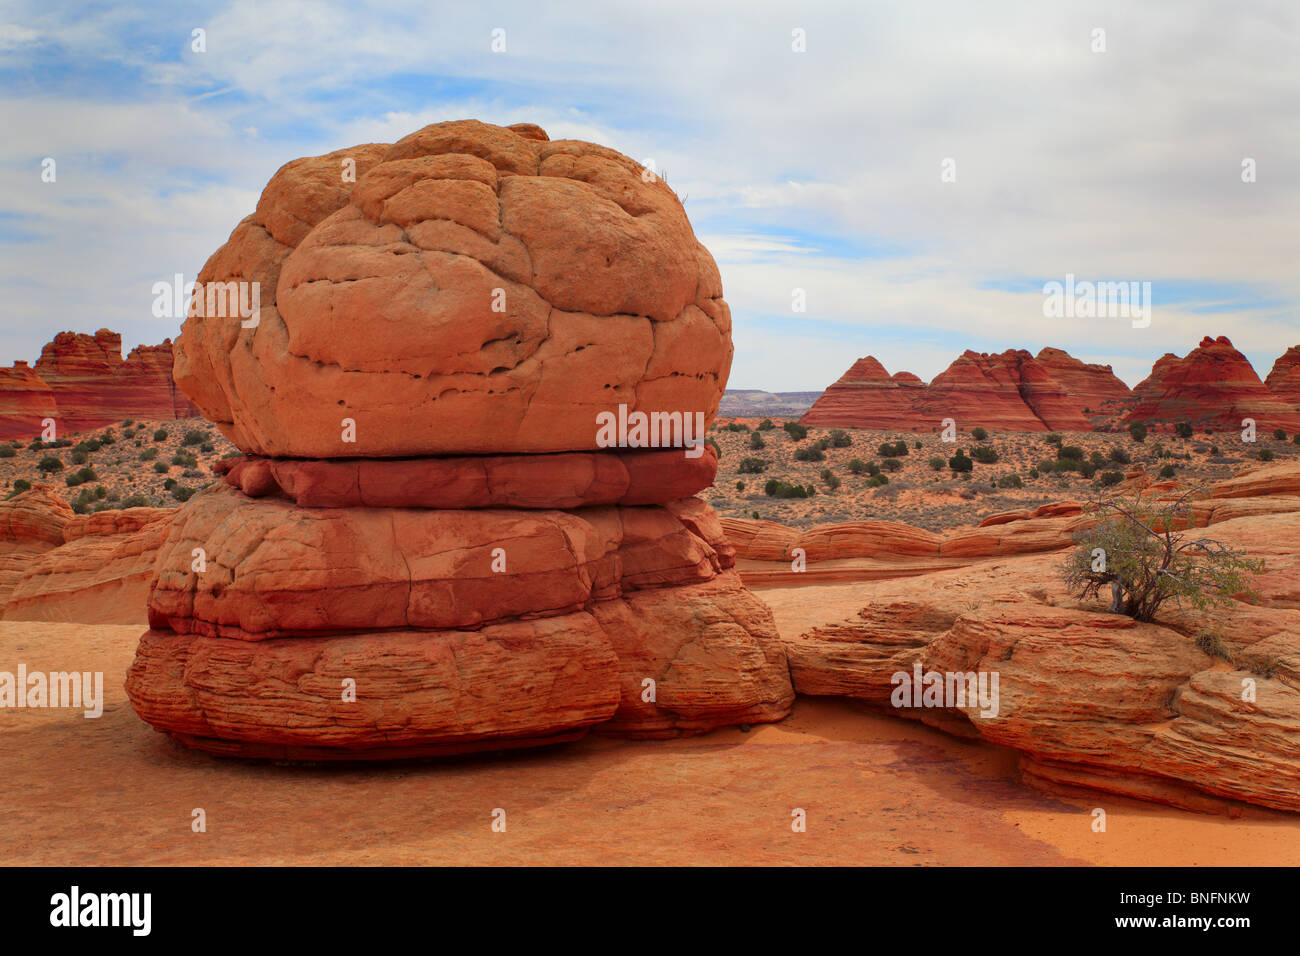 Eroded sandstone formation resembling a hamburger in Vermilion Cliffs National Monument, Arizona Stock Photo